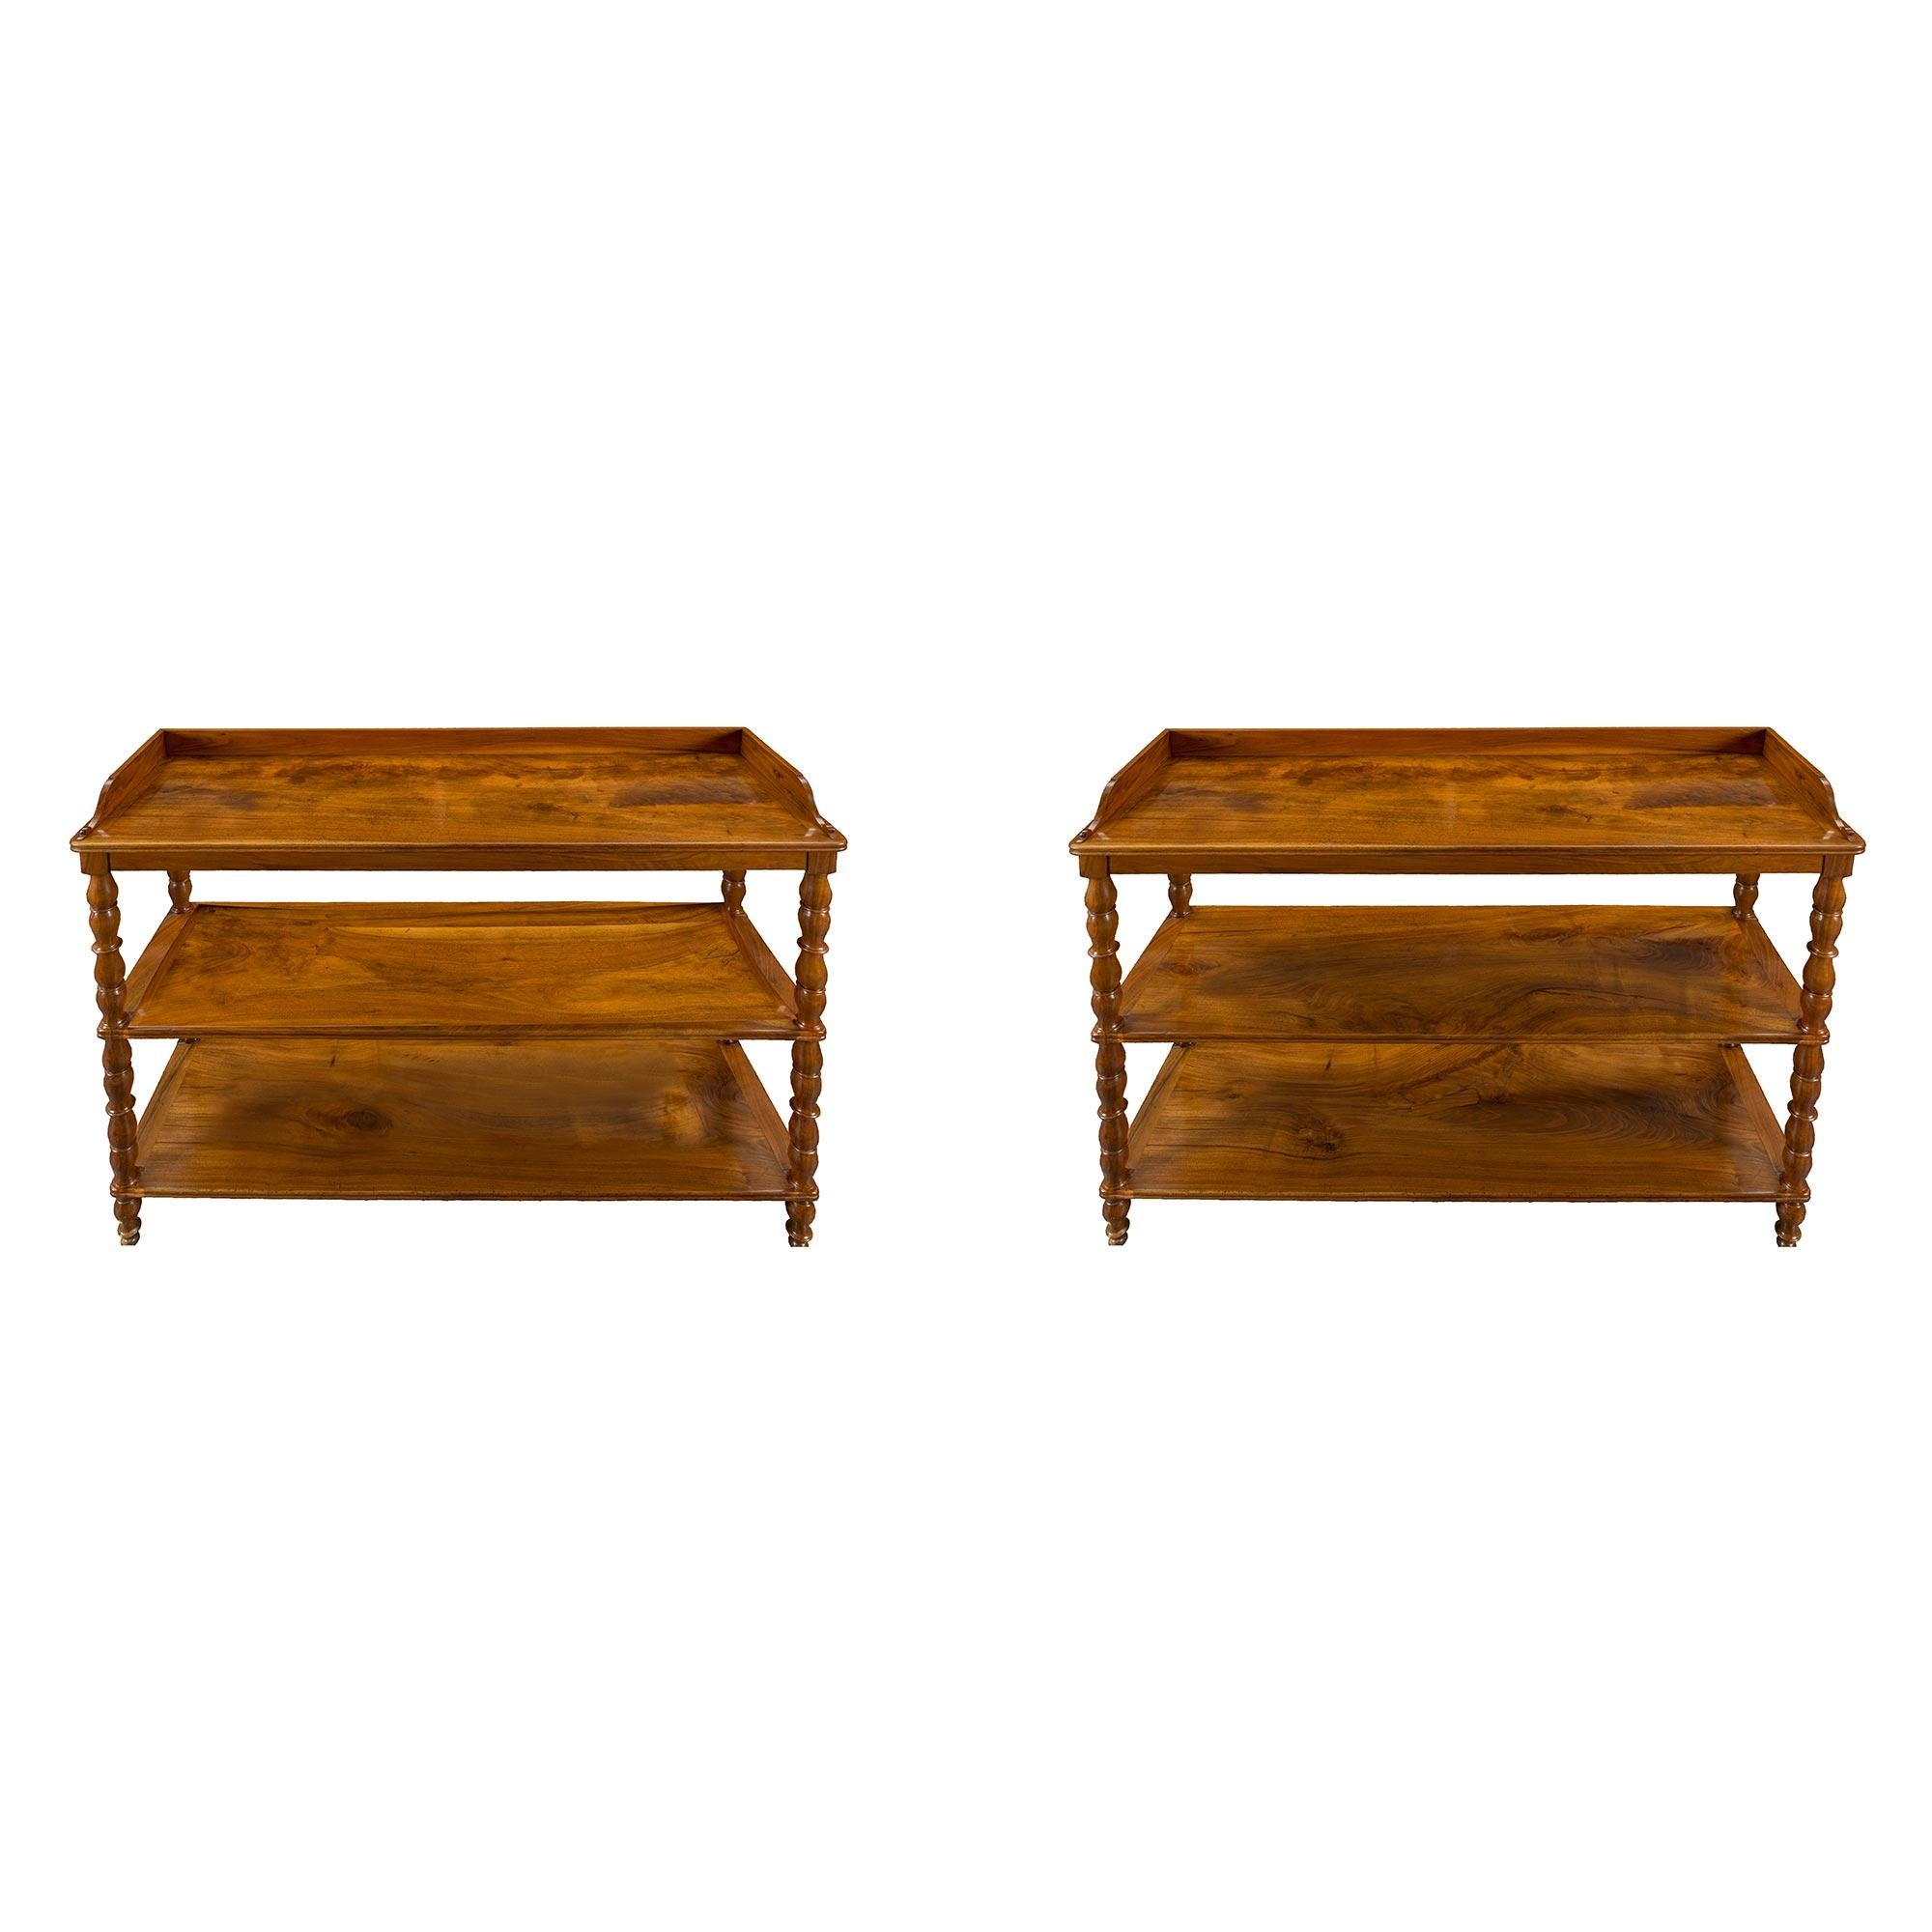 A superb pair of French 19th century Louis Philippe st. walnut étagères. Each étagère is raised by elegant turned legs that continue up each side. The three shelves display a mottled border and fine grain throughout. The top shelf is bordered with a